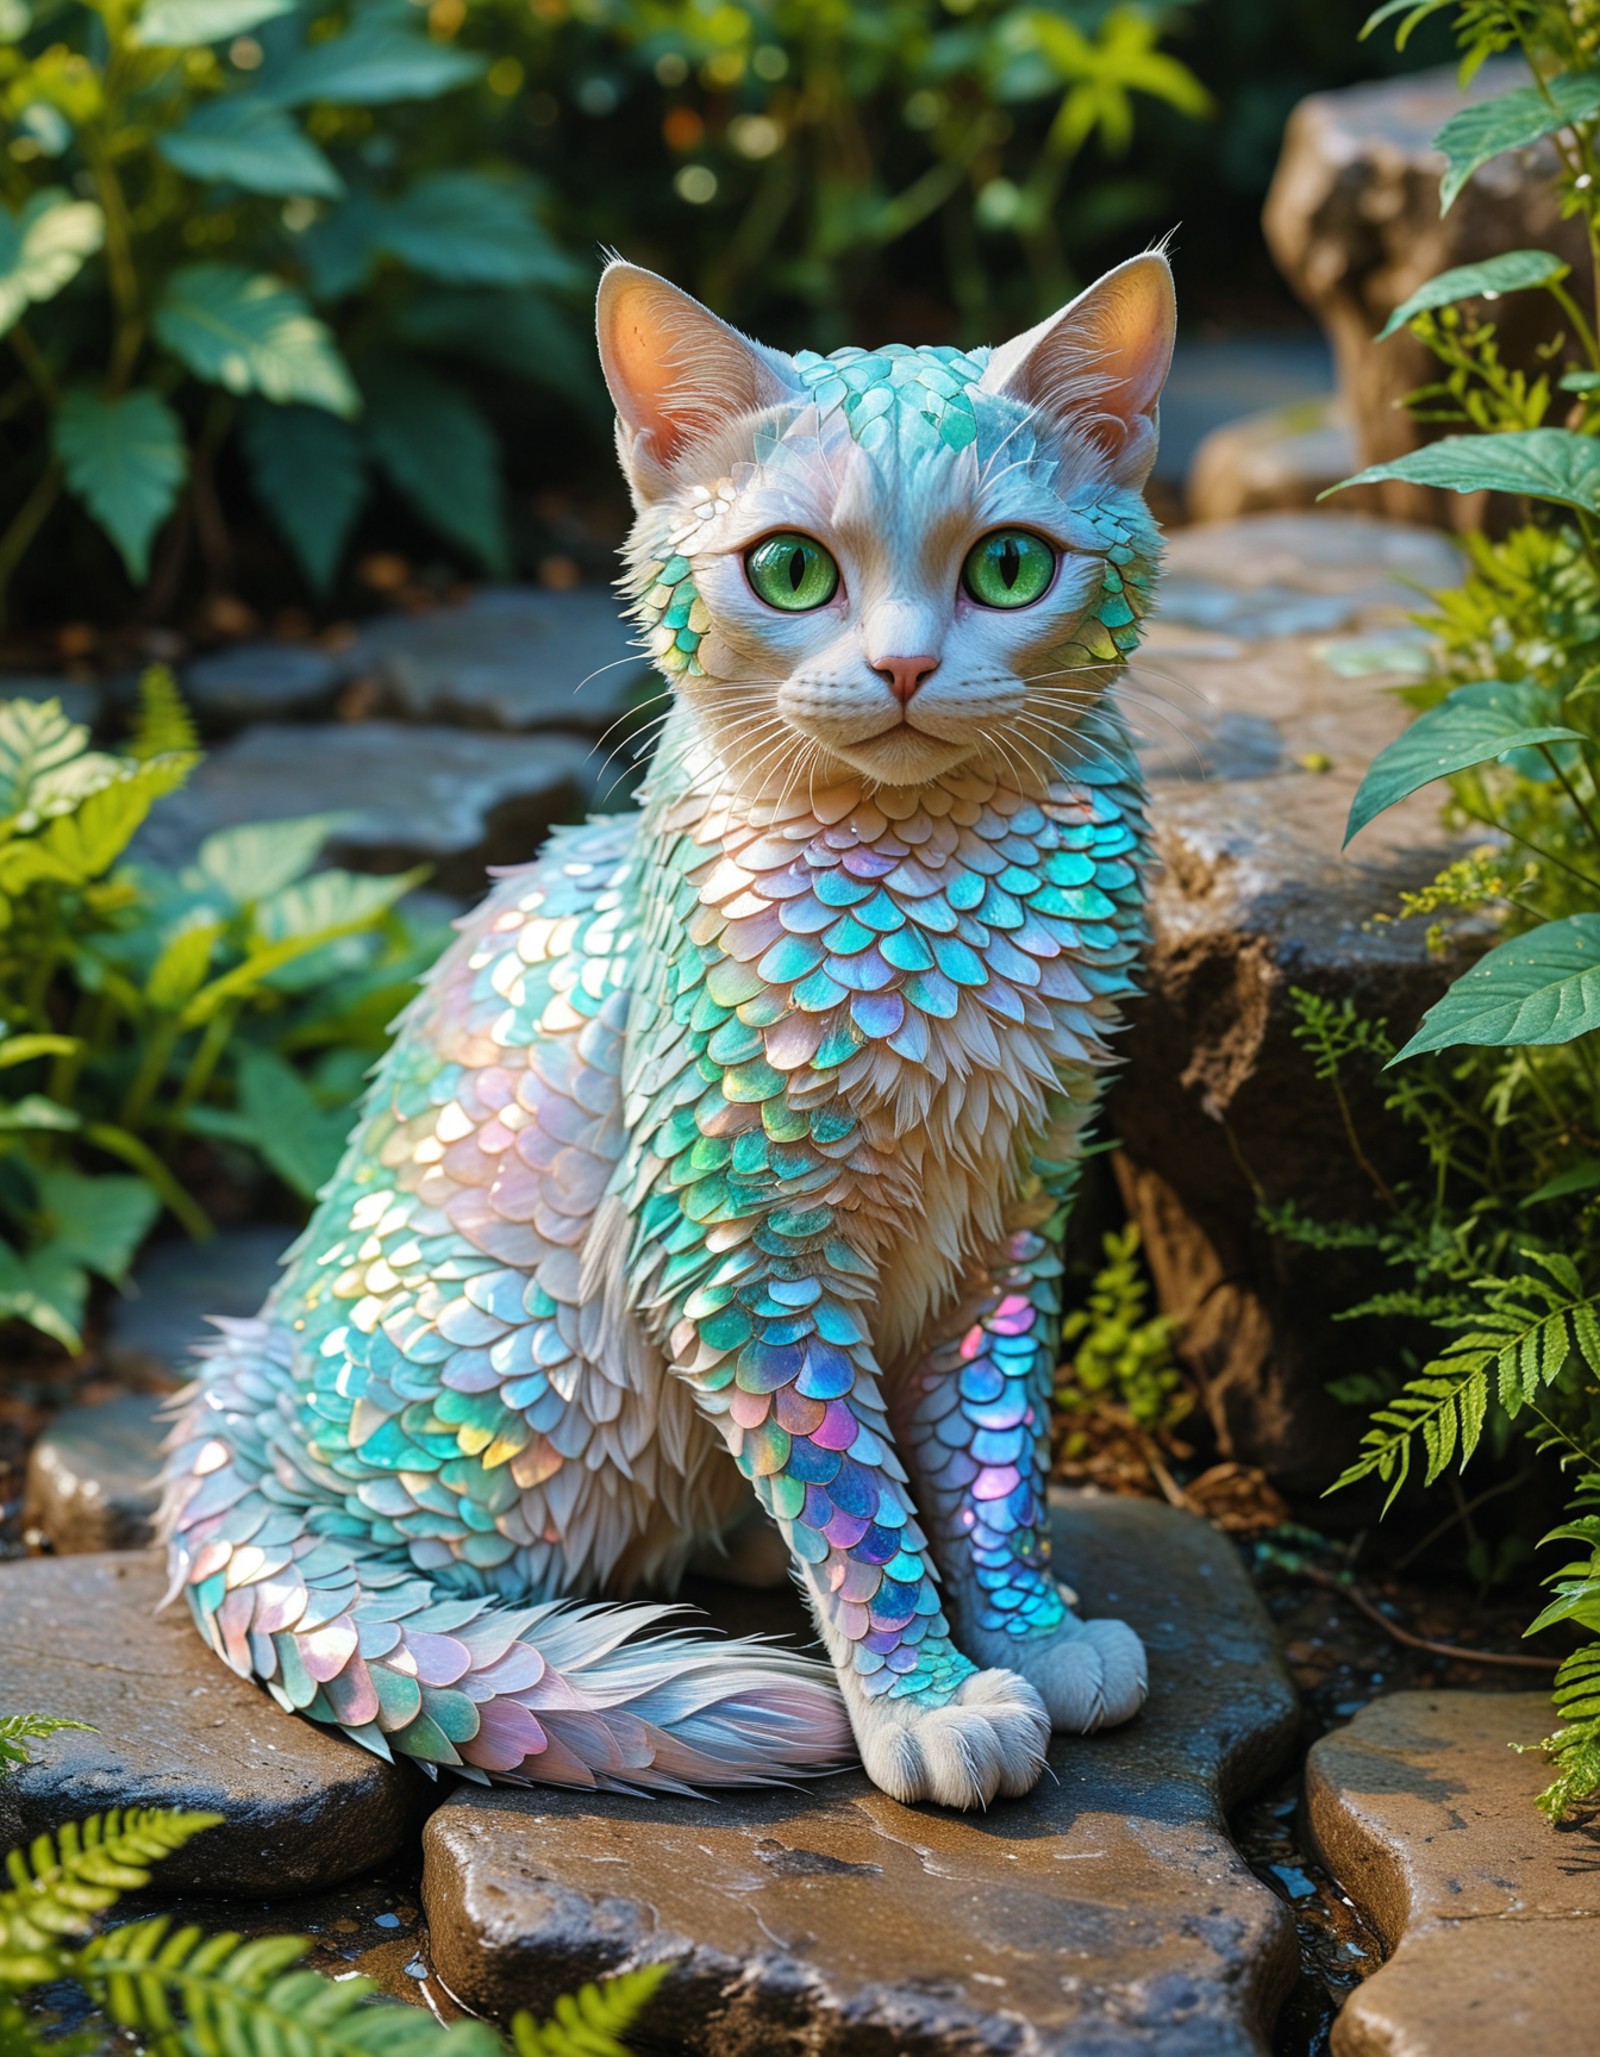 fantastical creature that resembles a cat with pastel iridescent scales covering its body and a long scaled tail, The scal...